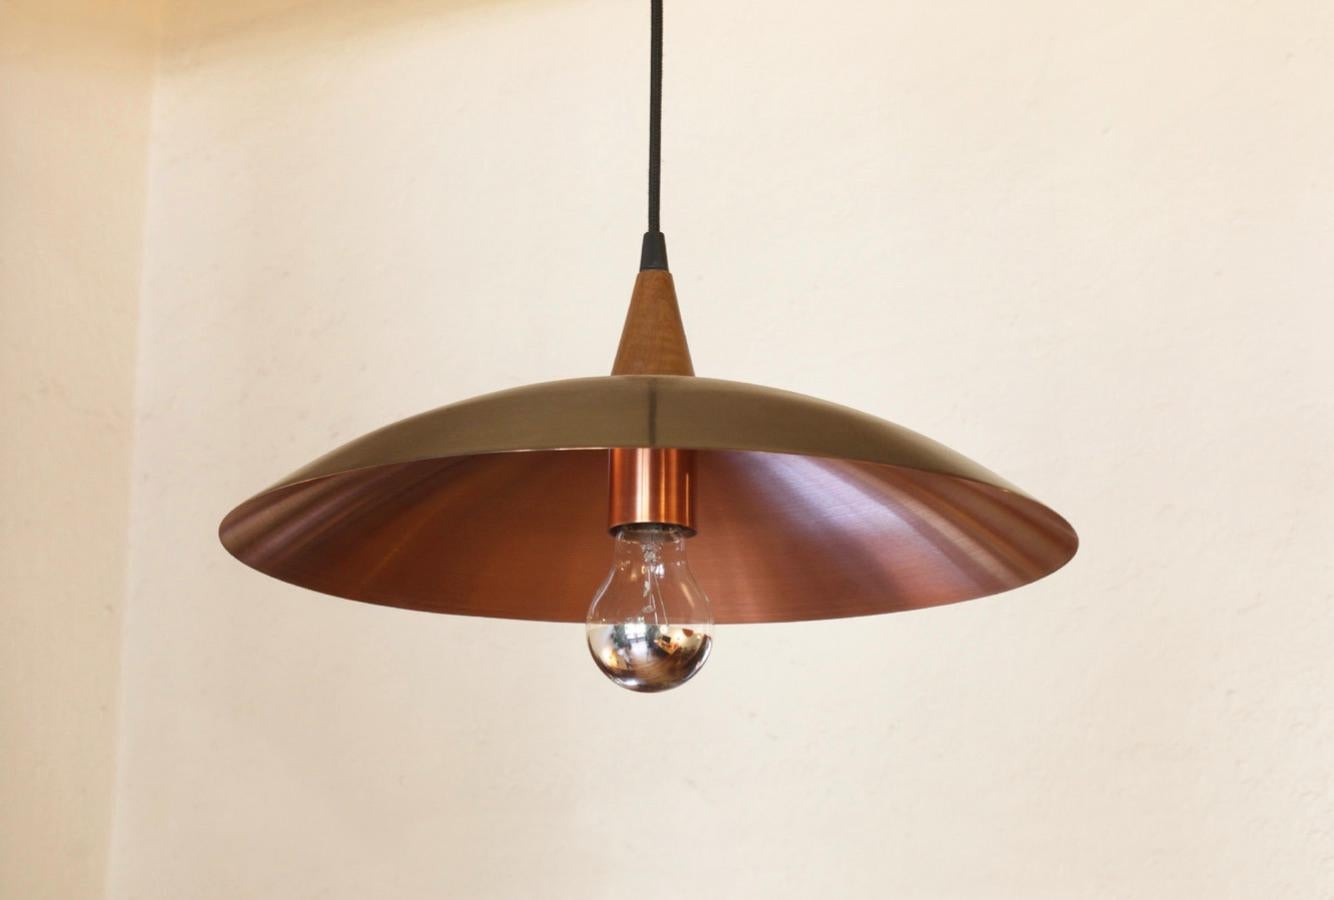 Plato Abajo 40 Pendant Lamp, Maria Beckmann, Represented by Tuleste Factory For Sale 2